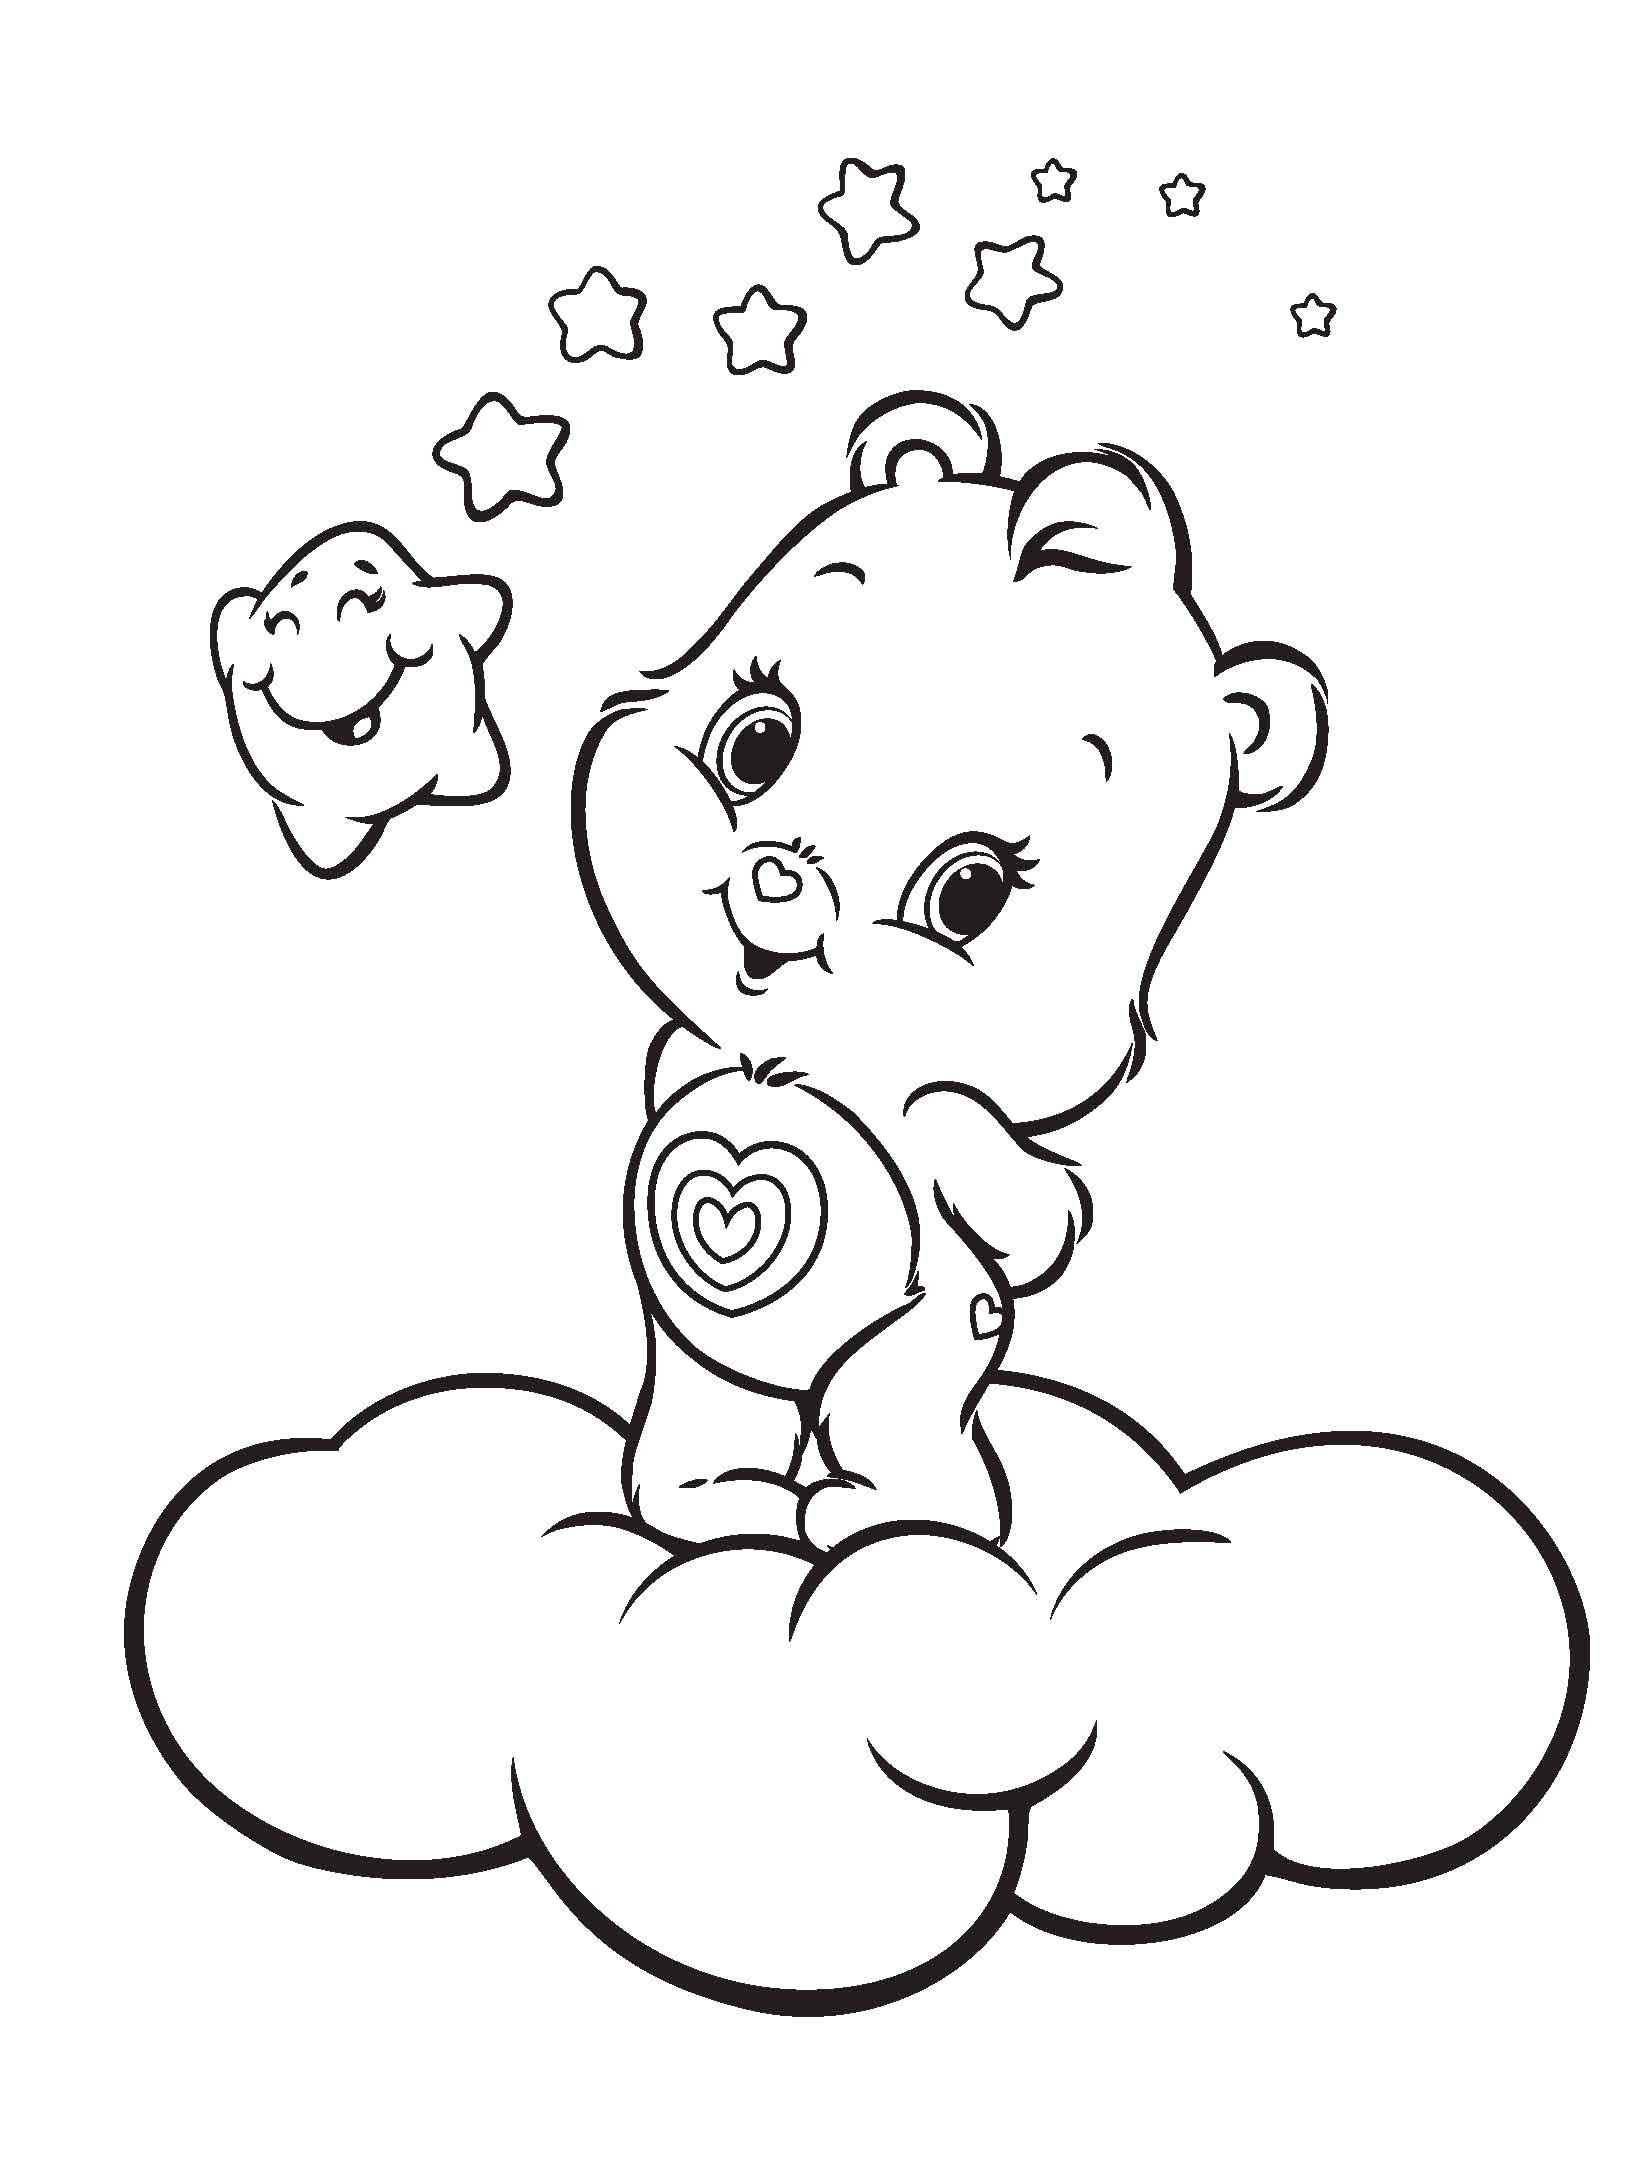 Baby Bear Coloring Pages
 Care Bears Coloring Coloring Pages Kidsuki